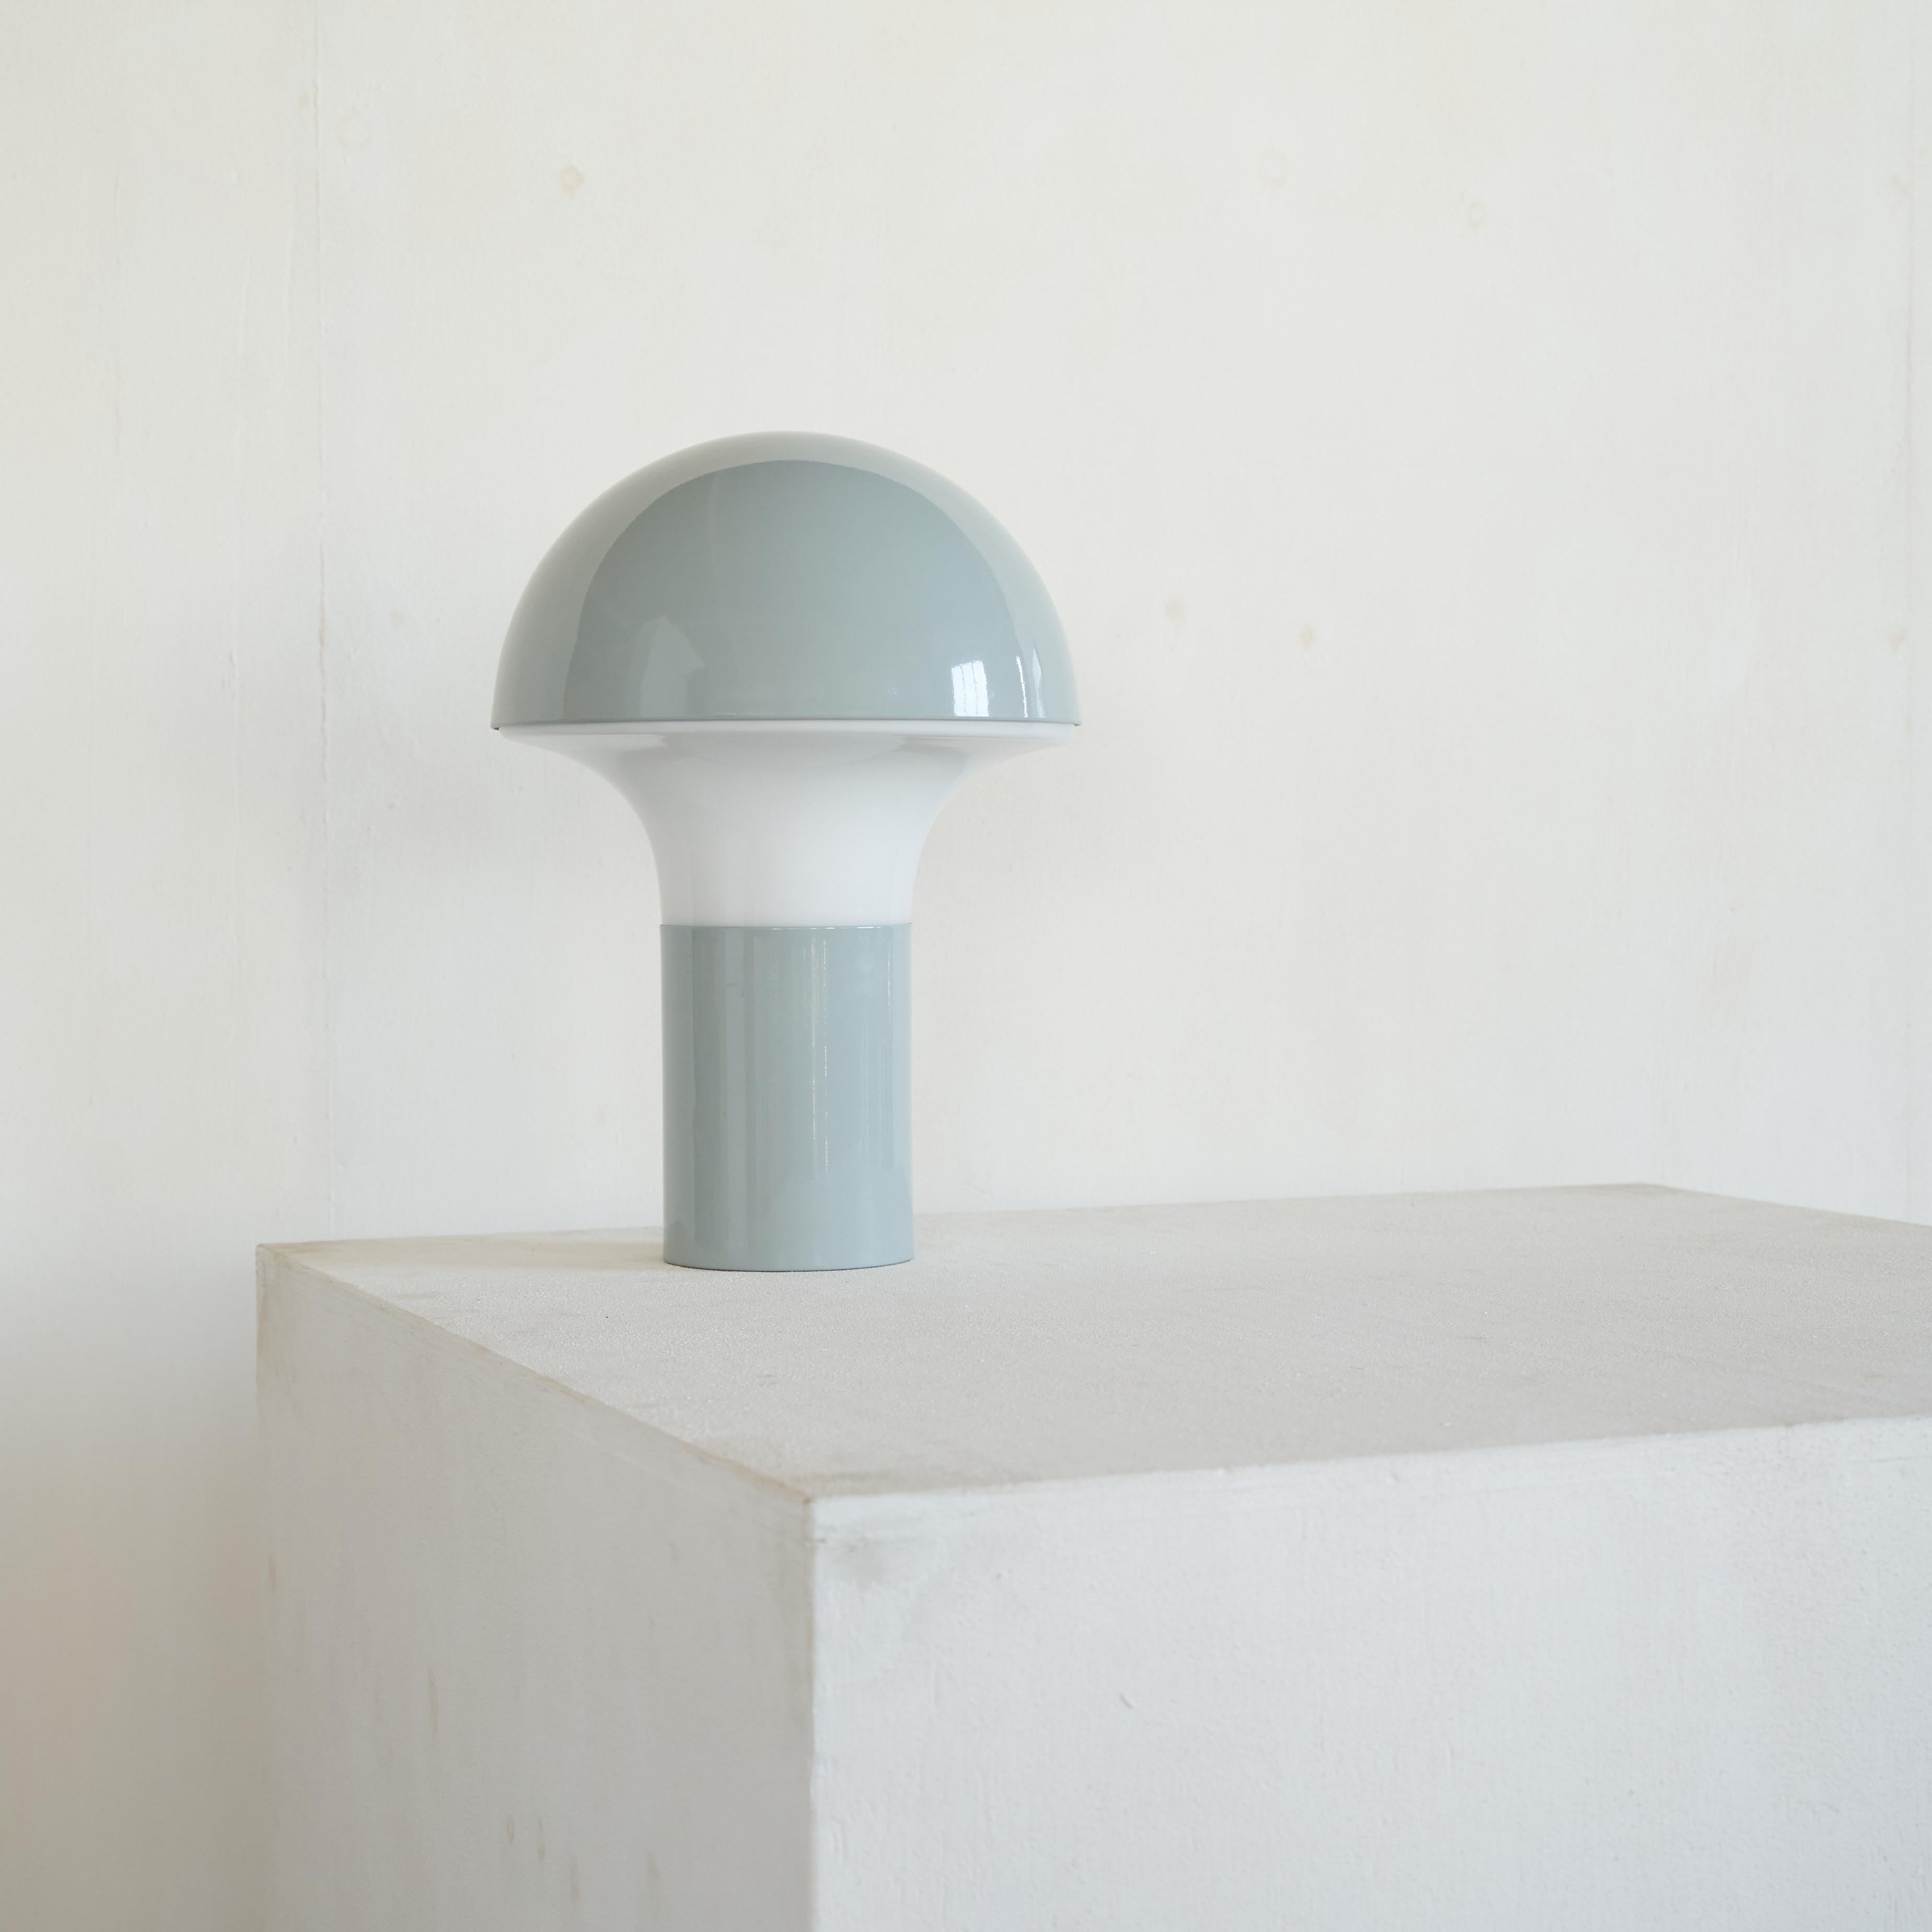 Mushroom table lamp in light blue metal and opaline glass. Fiesole, Florence, Italy, 1970s.

This is a large mushroom table lamp in opaline glass and baby blue from Italy. Made somewhere in the 1970s by a company from Fiesole, Florence.

This